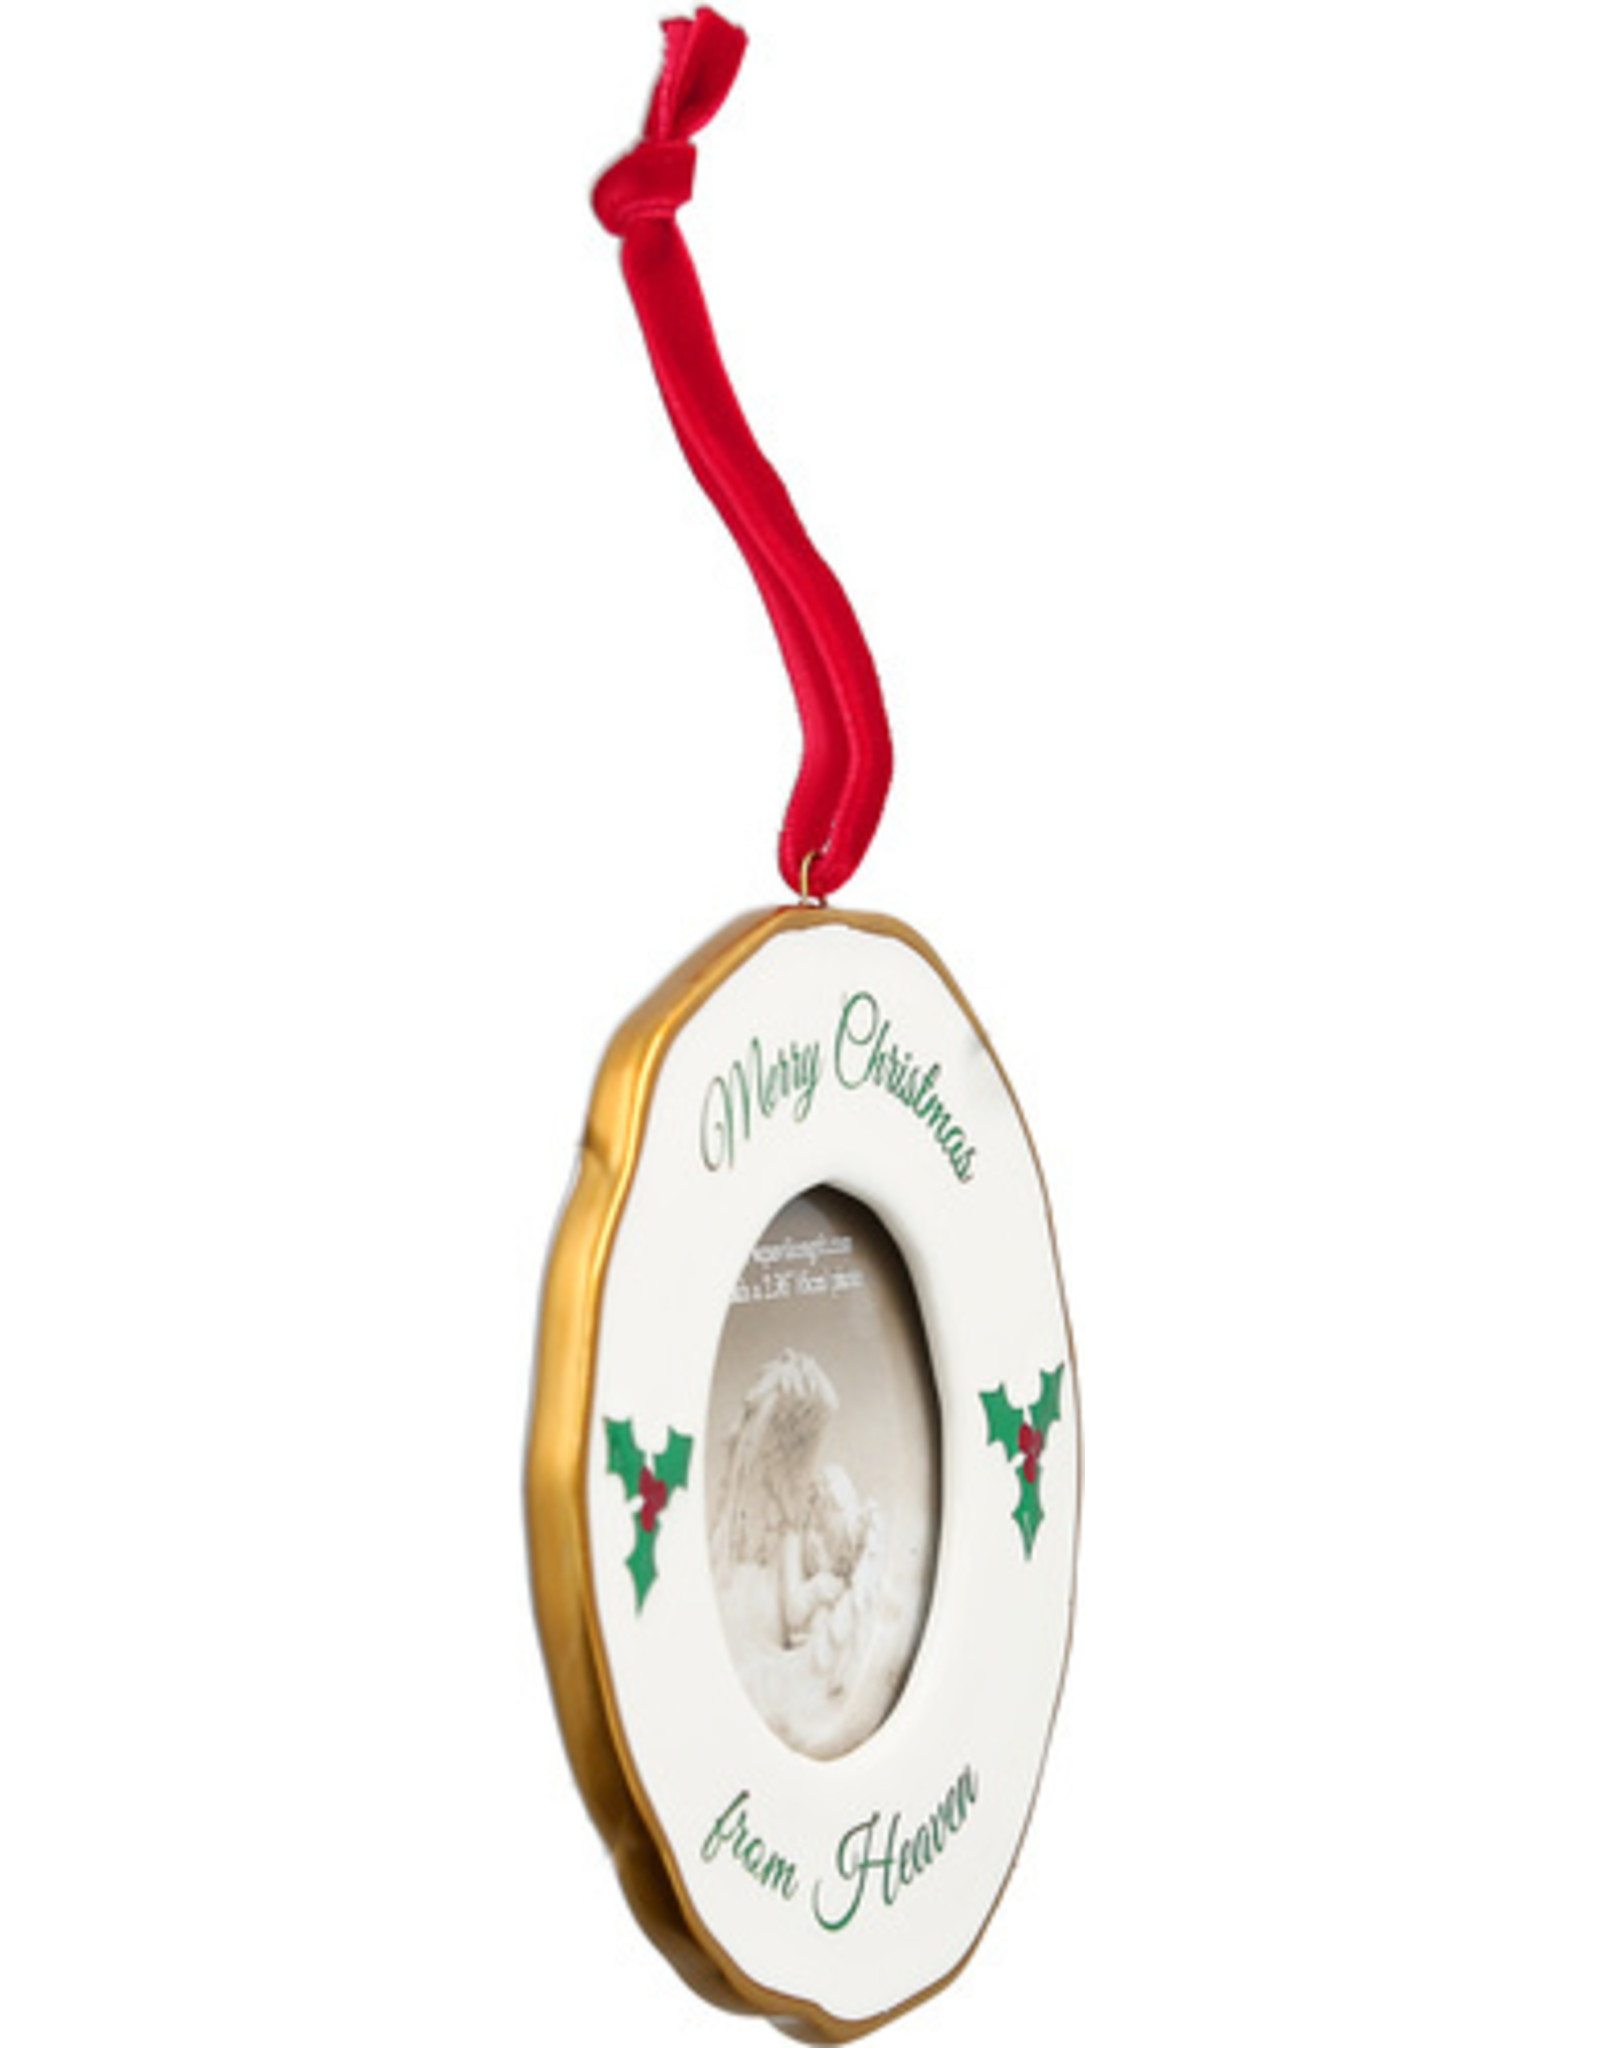 PGC Christmas From Heaven Photo Frame Ornament 4"